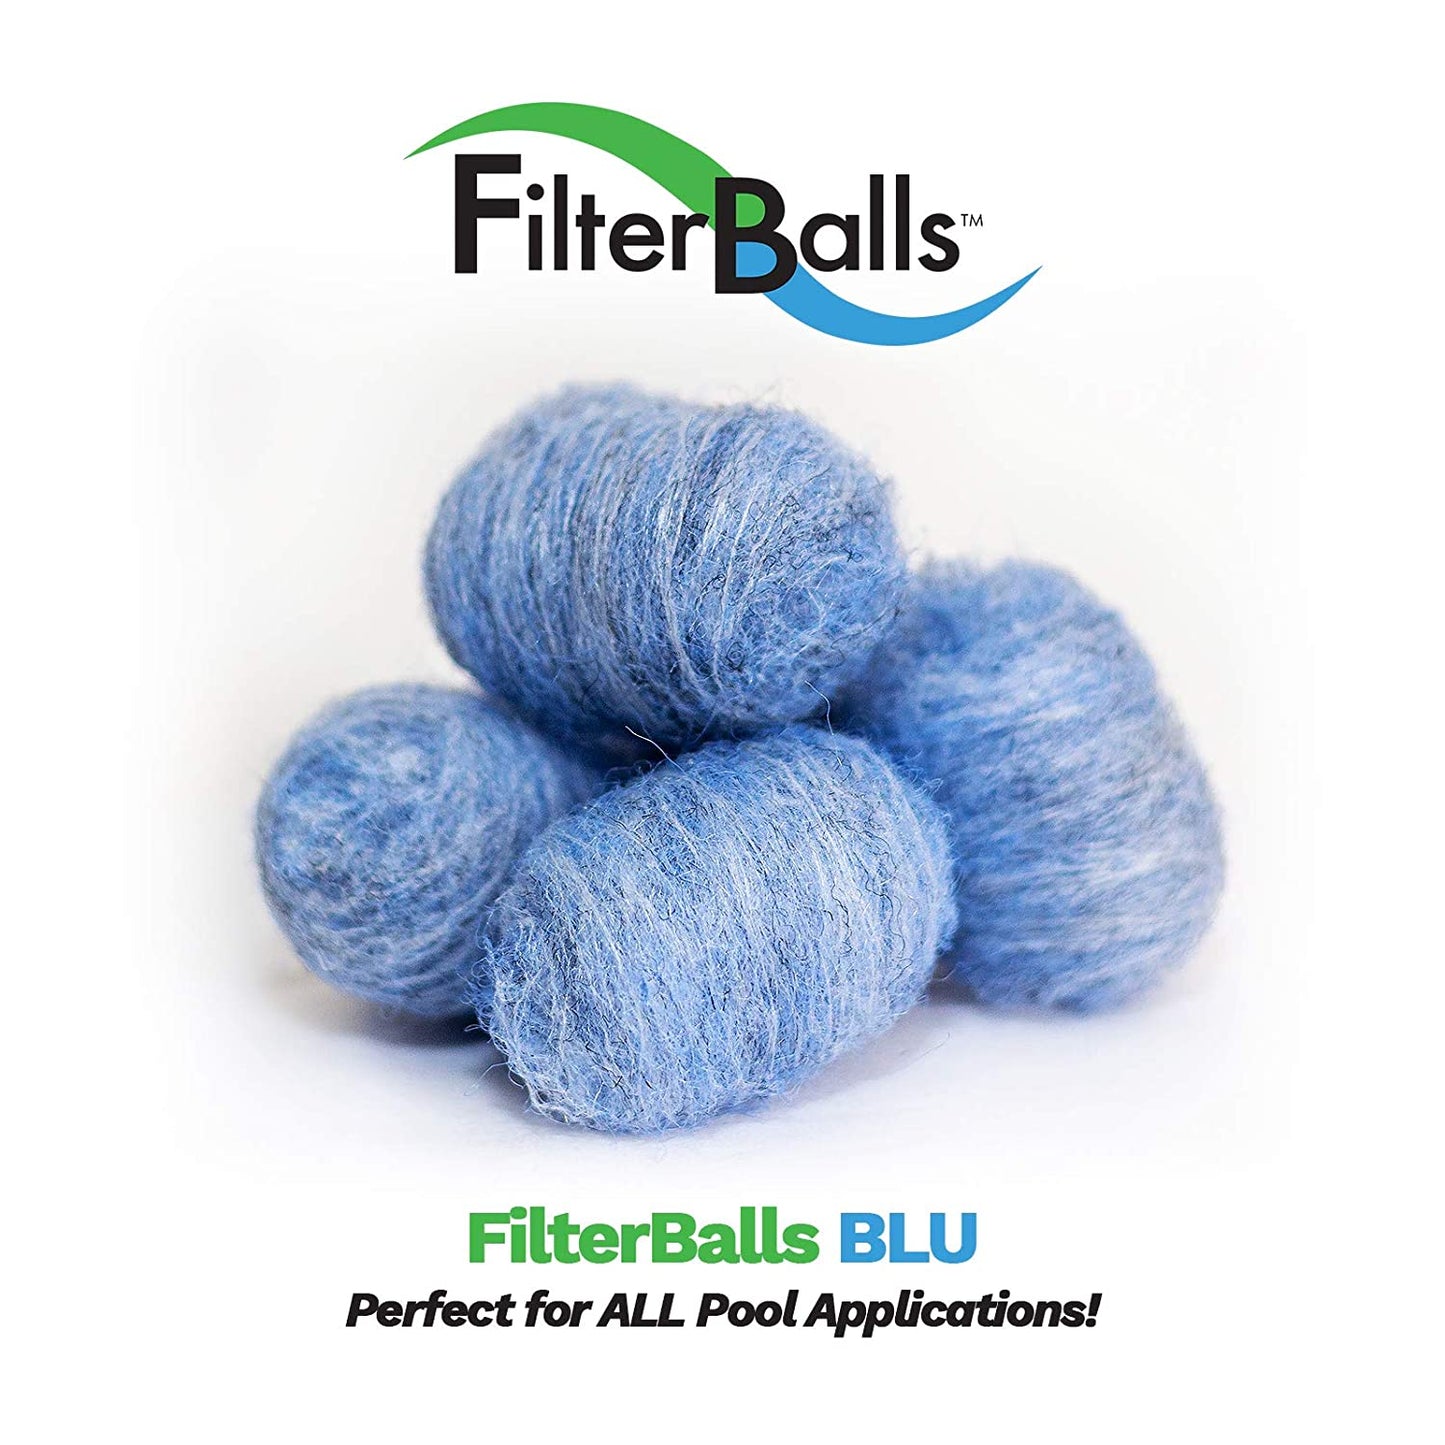 FilterBalls Blu™ (5-pack) -   For sand housings rated at 425 to 500 Lbs